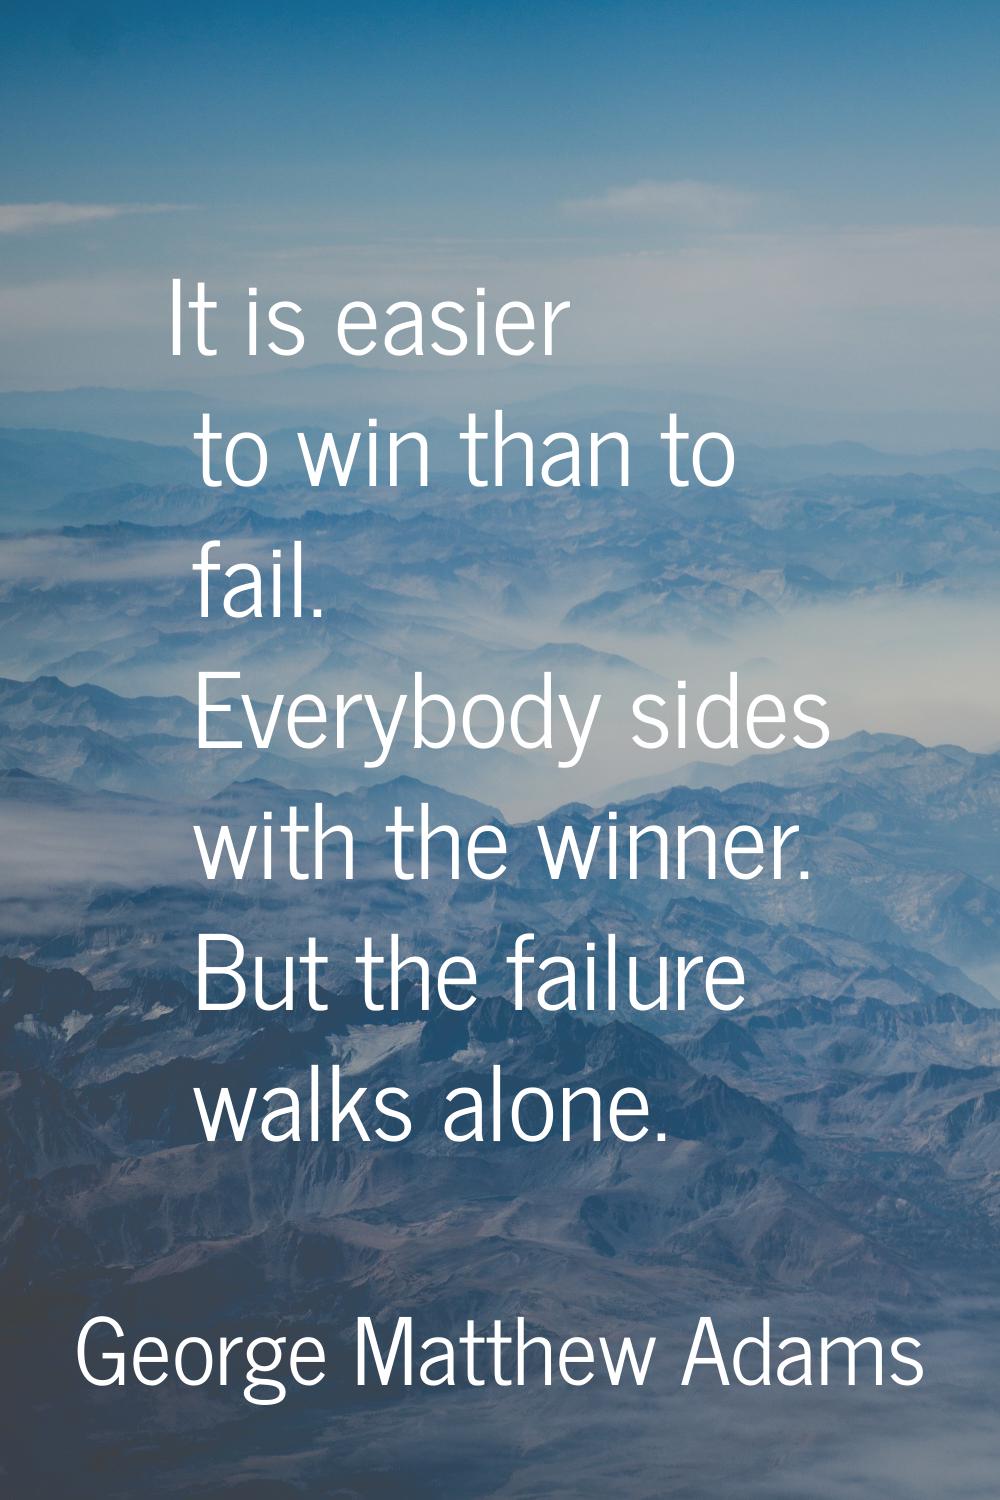 It is easier to win than to fail. Everybody sides with the winner. But the failure walks alone.